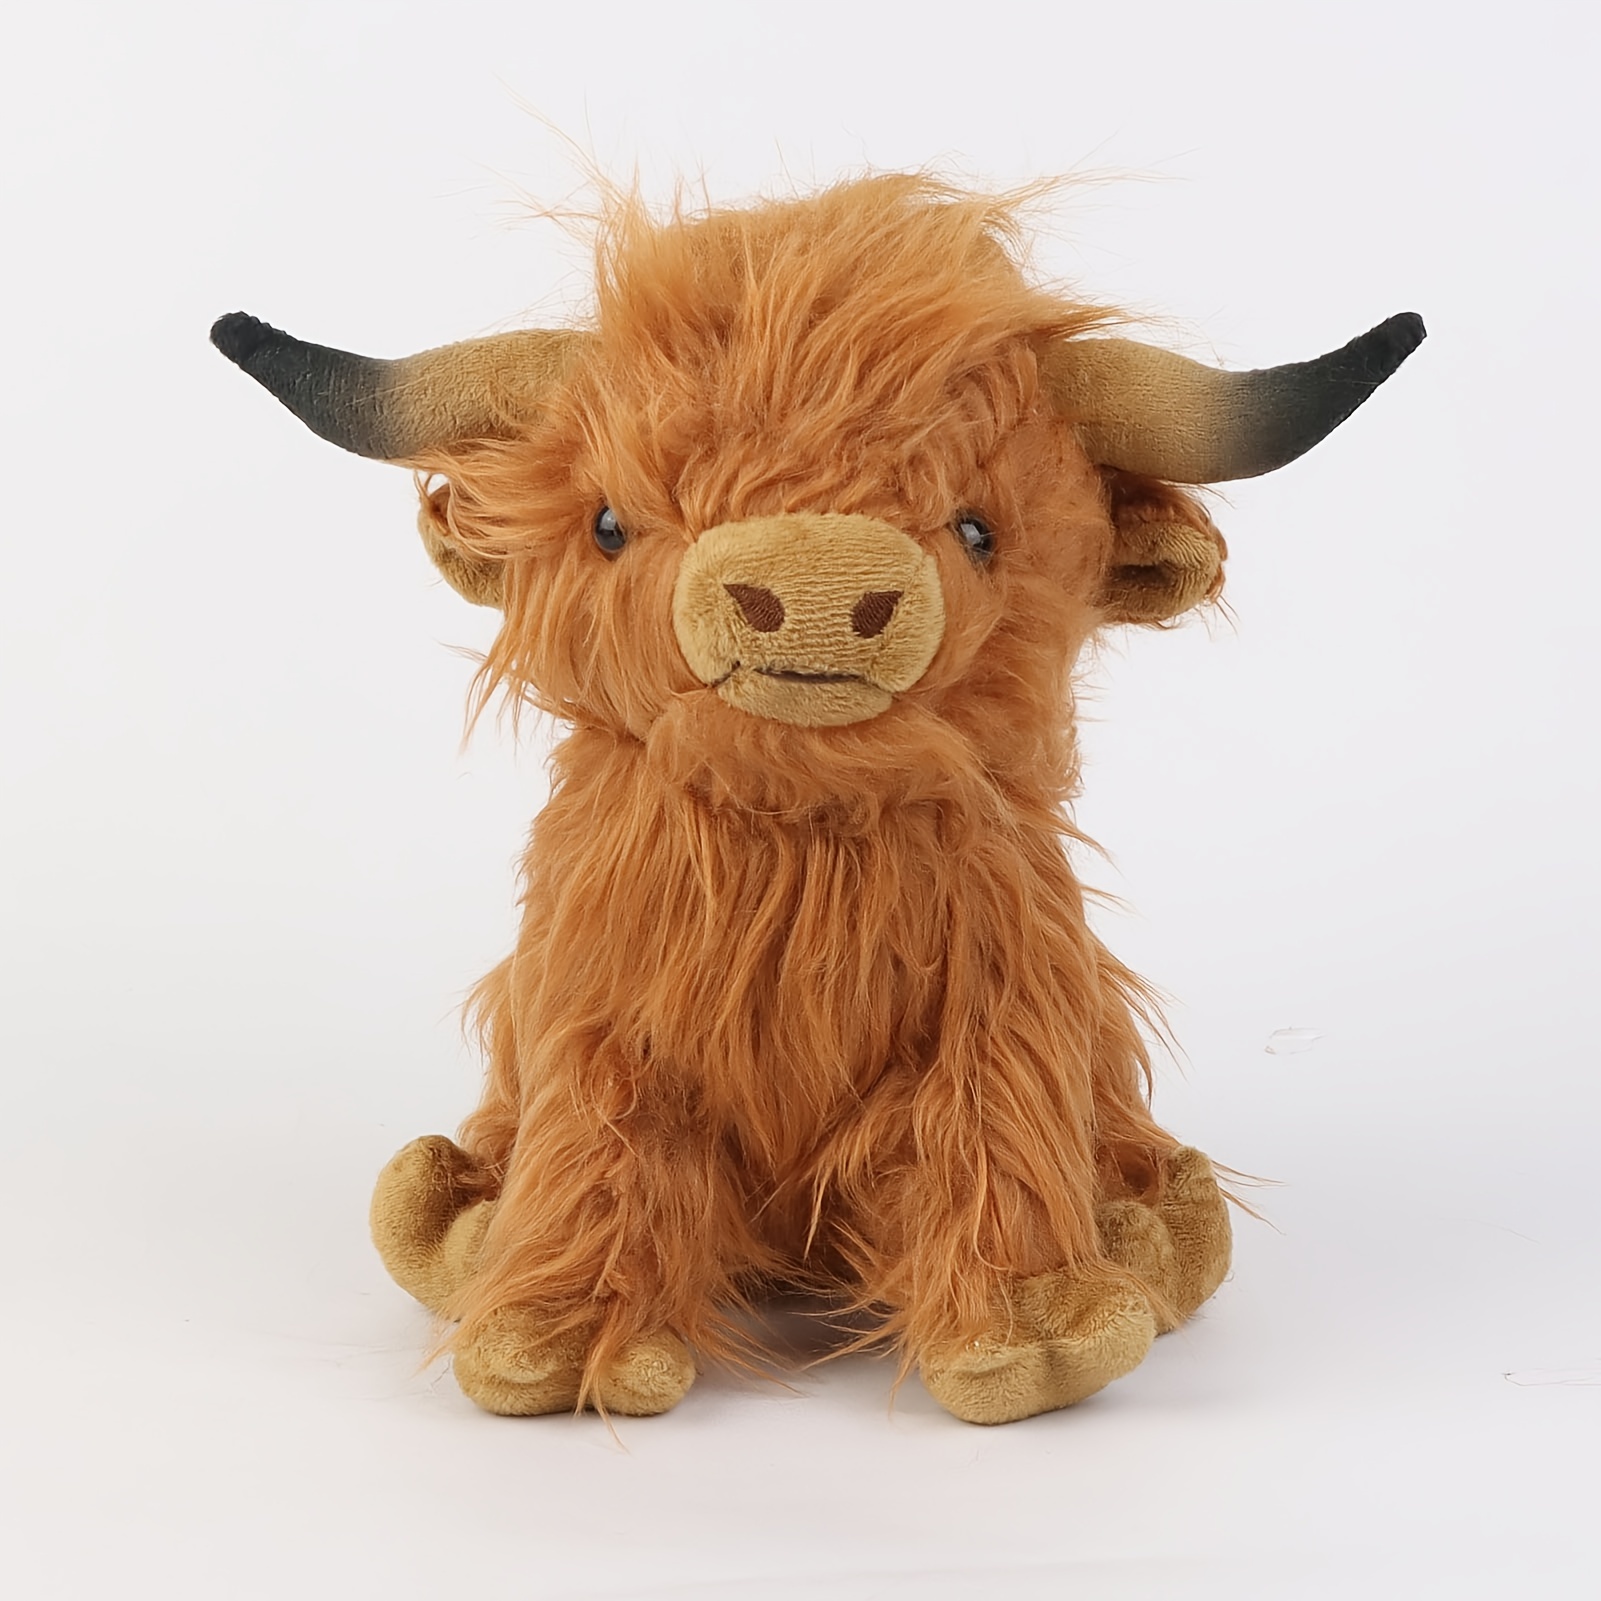 

Simulation Highland Cow Plush Animal Doll, Soft Stuffed Highland Cow Plush Toy, Kawaii Highland Cow Birthday Gift Toy, Home Room Decor, Easter Christmas Gift Toy